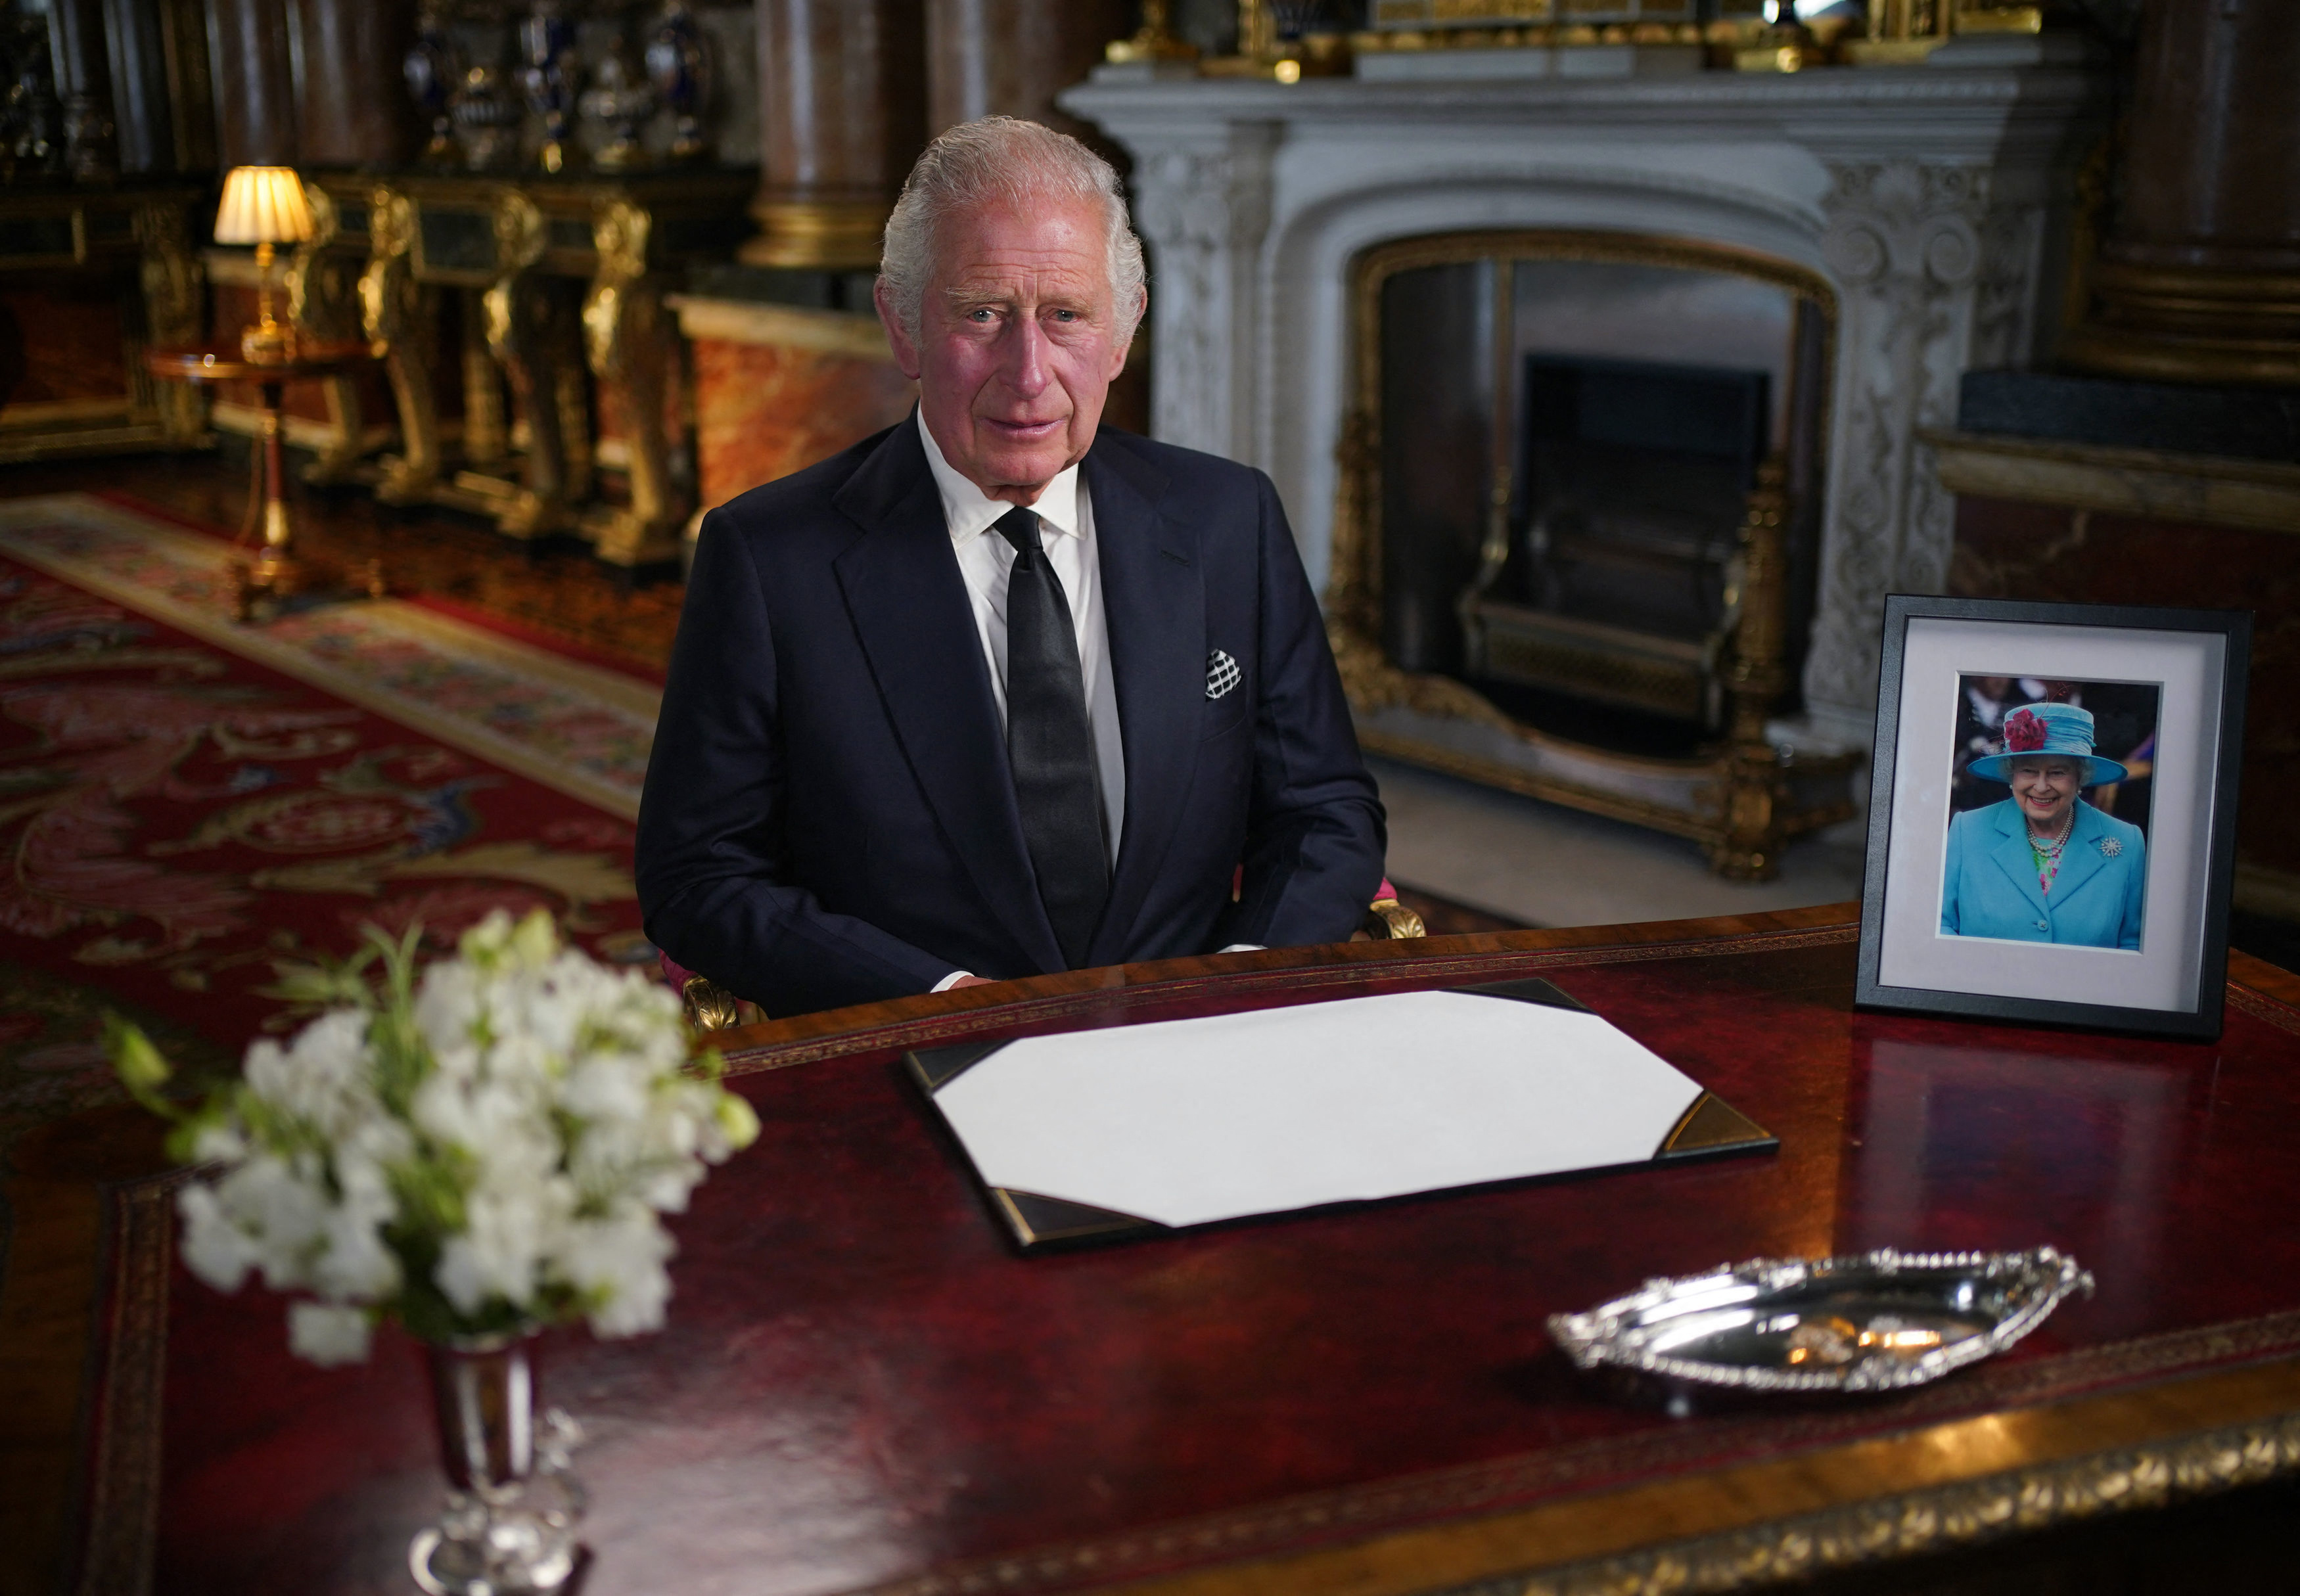 King Charles III makes a televised address at Buckingham Palace in London on September 9, 2022 | Source: Getty Images